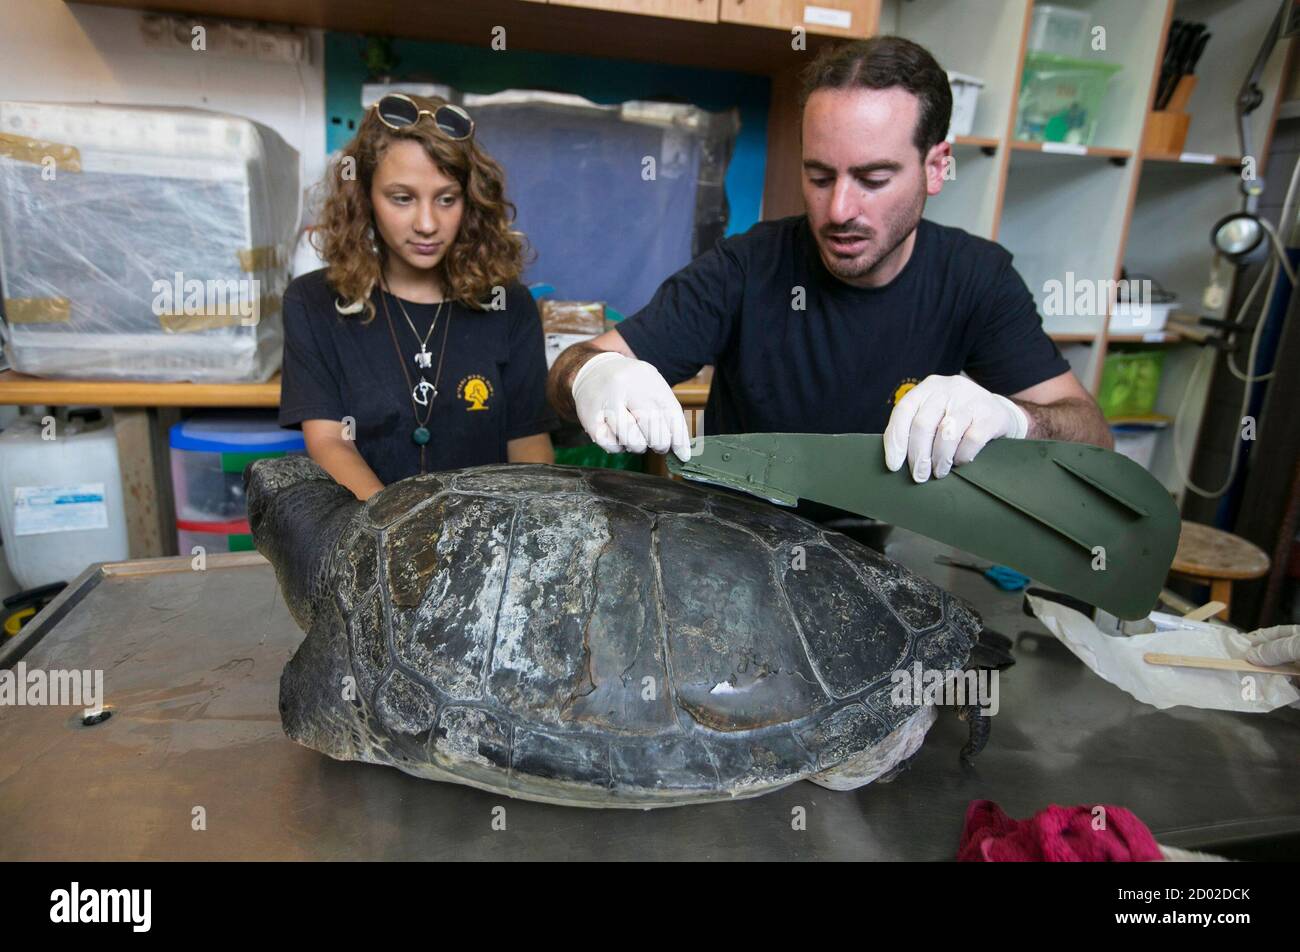 Industrial design student Shlomi Gez (R) attaches an artificial fin onto the back of Hofesh, an injured male green sea turtle, at the Israel Sea Turtle Rescue Center, in Michmoret north of Tel Aviv April 9, 2014. The turtle was brought to the centre some four years ago missing both limbs on the left-hand-side of his body, but on Wednesday an artificial fin, designed by Gez, was attached to Hofesh's back, offering him stability and a more permanent solution to his disability. Hofesh will not be released back into the wild as he cannot survive if something were to happen to the fin. REUTERS/Baz  Stock Photo